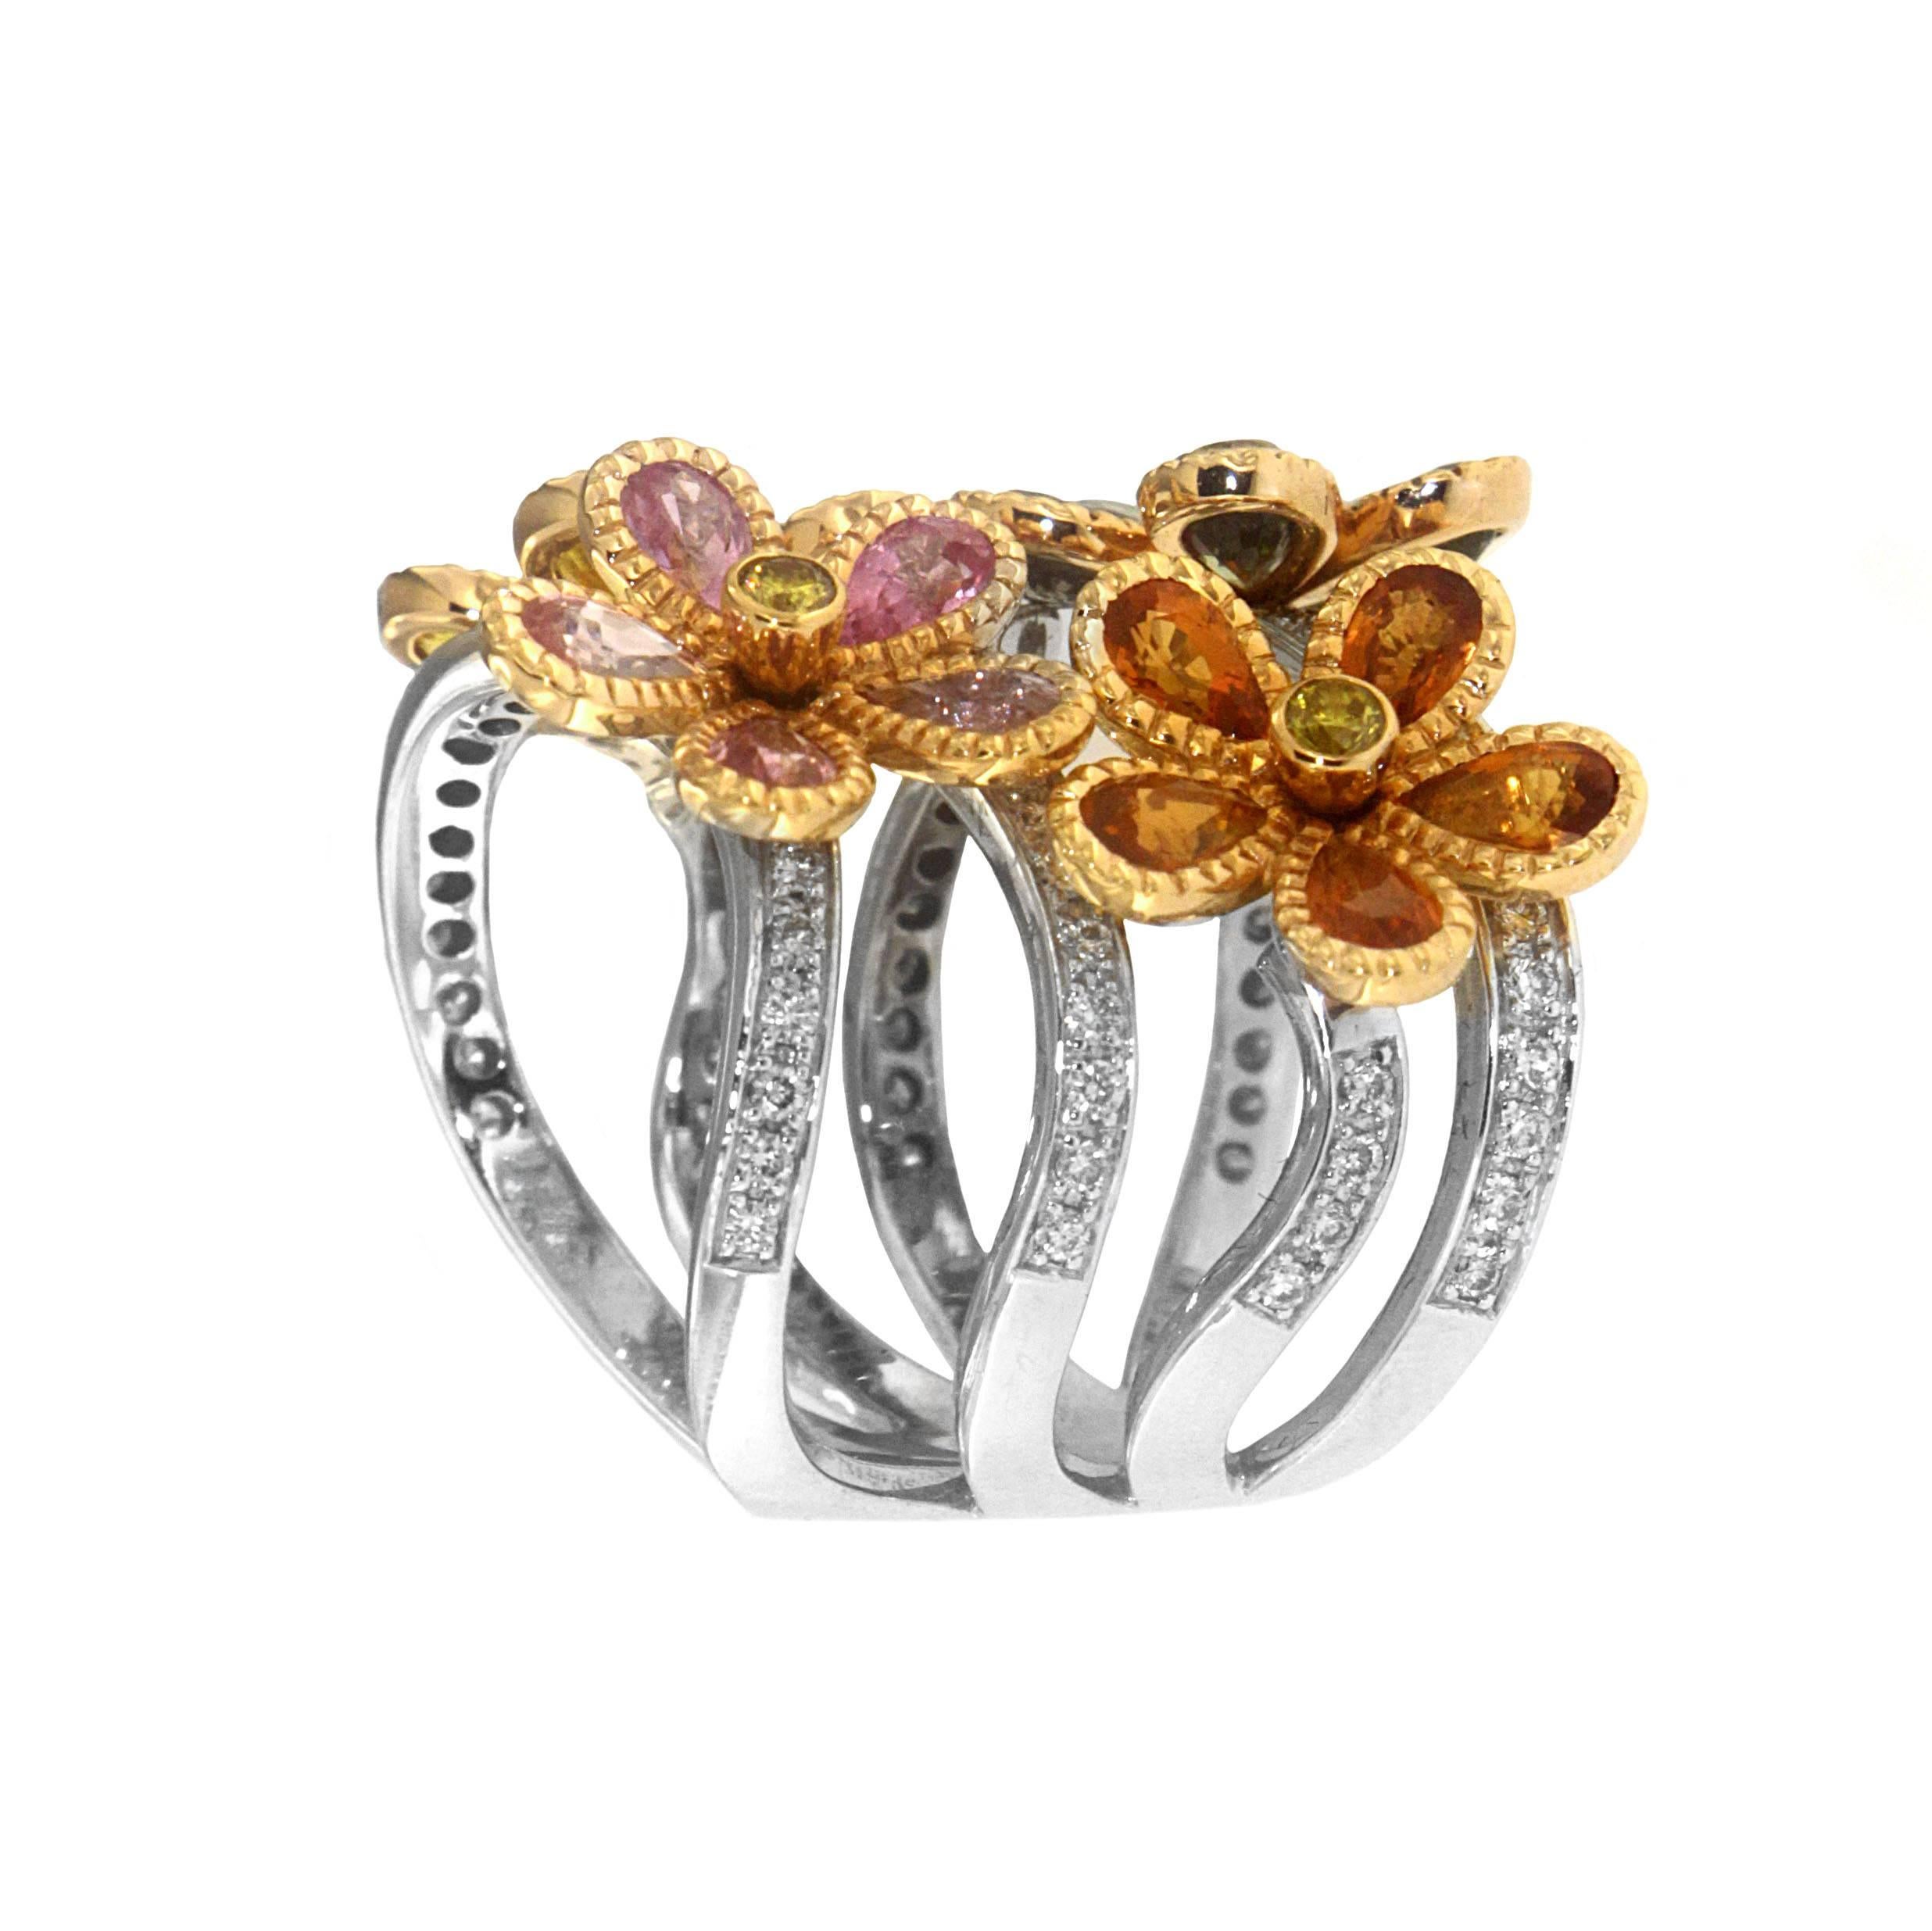 Zorab captures nature with its most delicate delight - blooming flowers created with 2.31 Carats of Green Sapphire, 2.00 Carats of Orange Sapphire, and 2.01 Carats of Pink Sapphire. The twinkling bouquet is set with 0.77 Carats of White Diamonds and